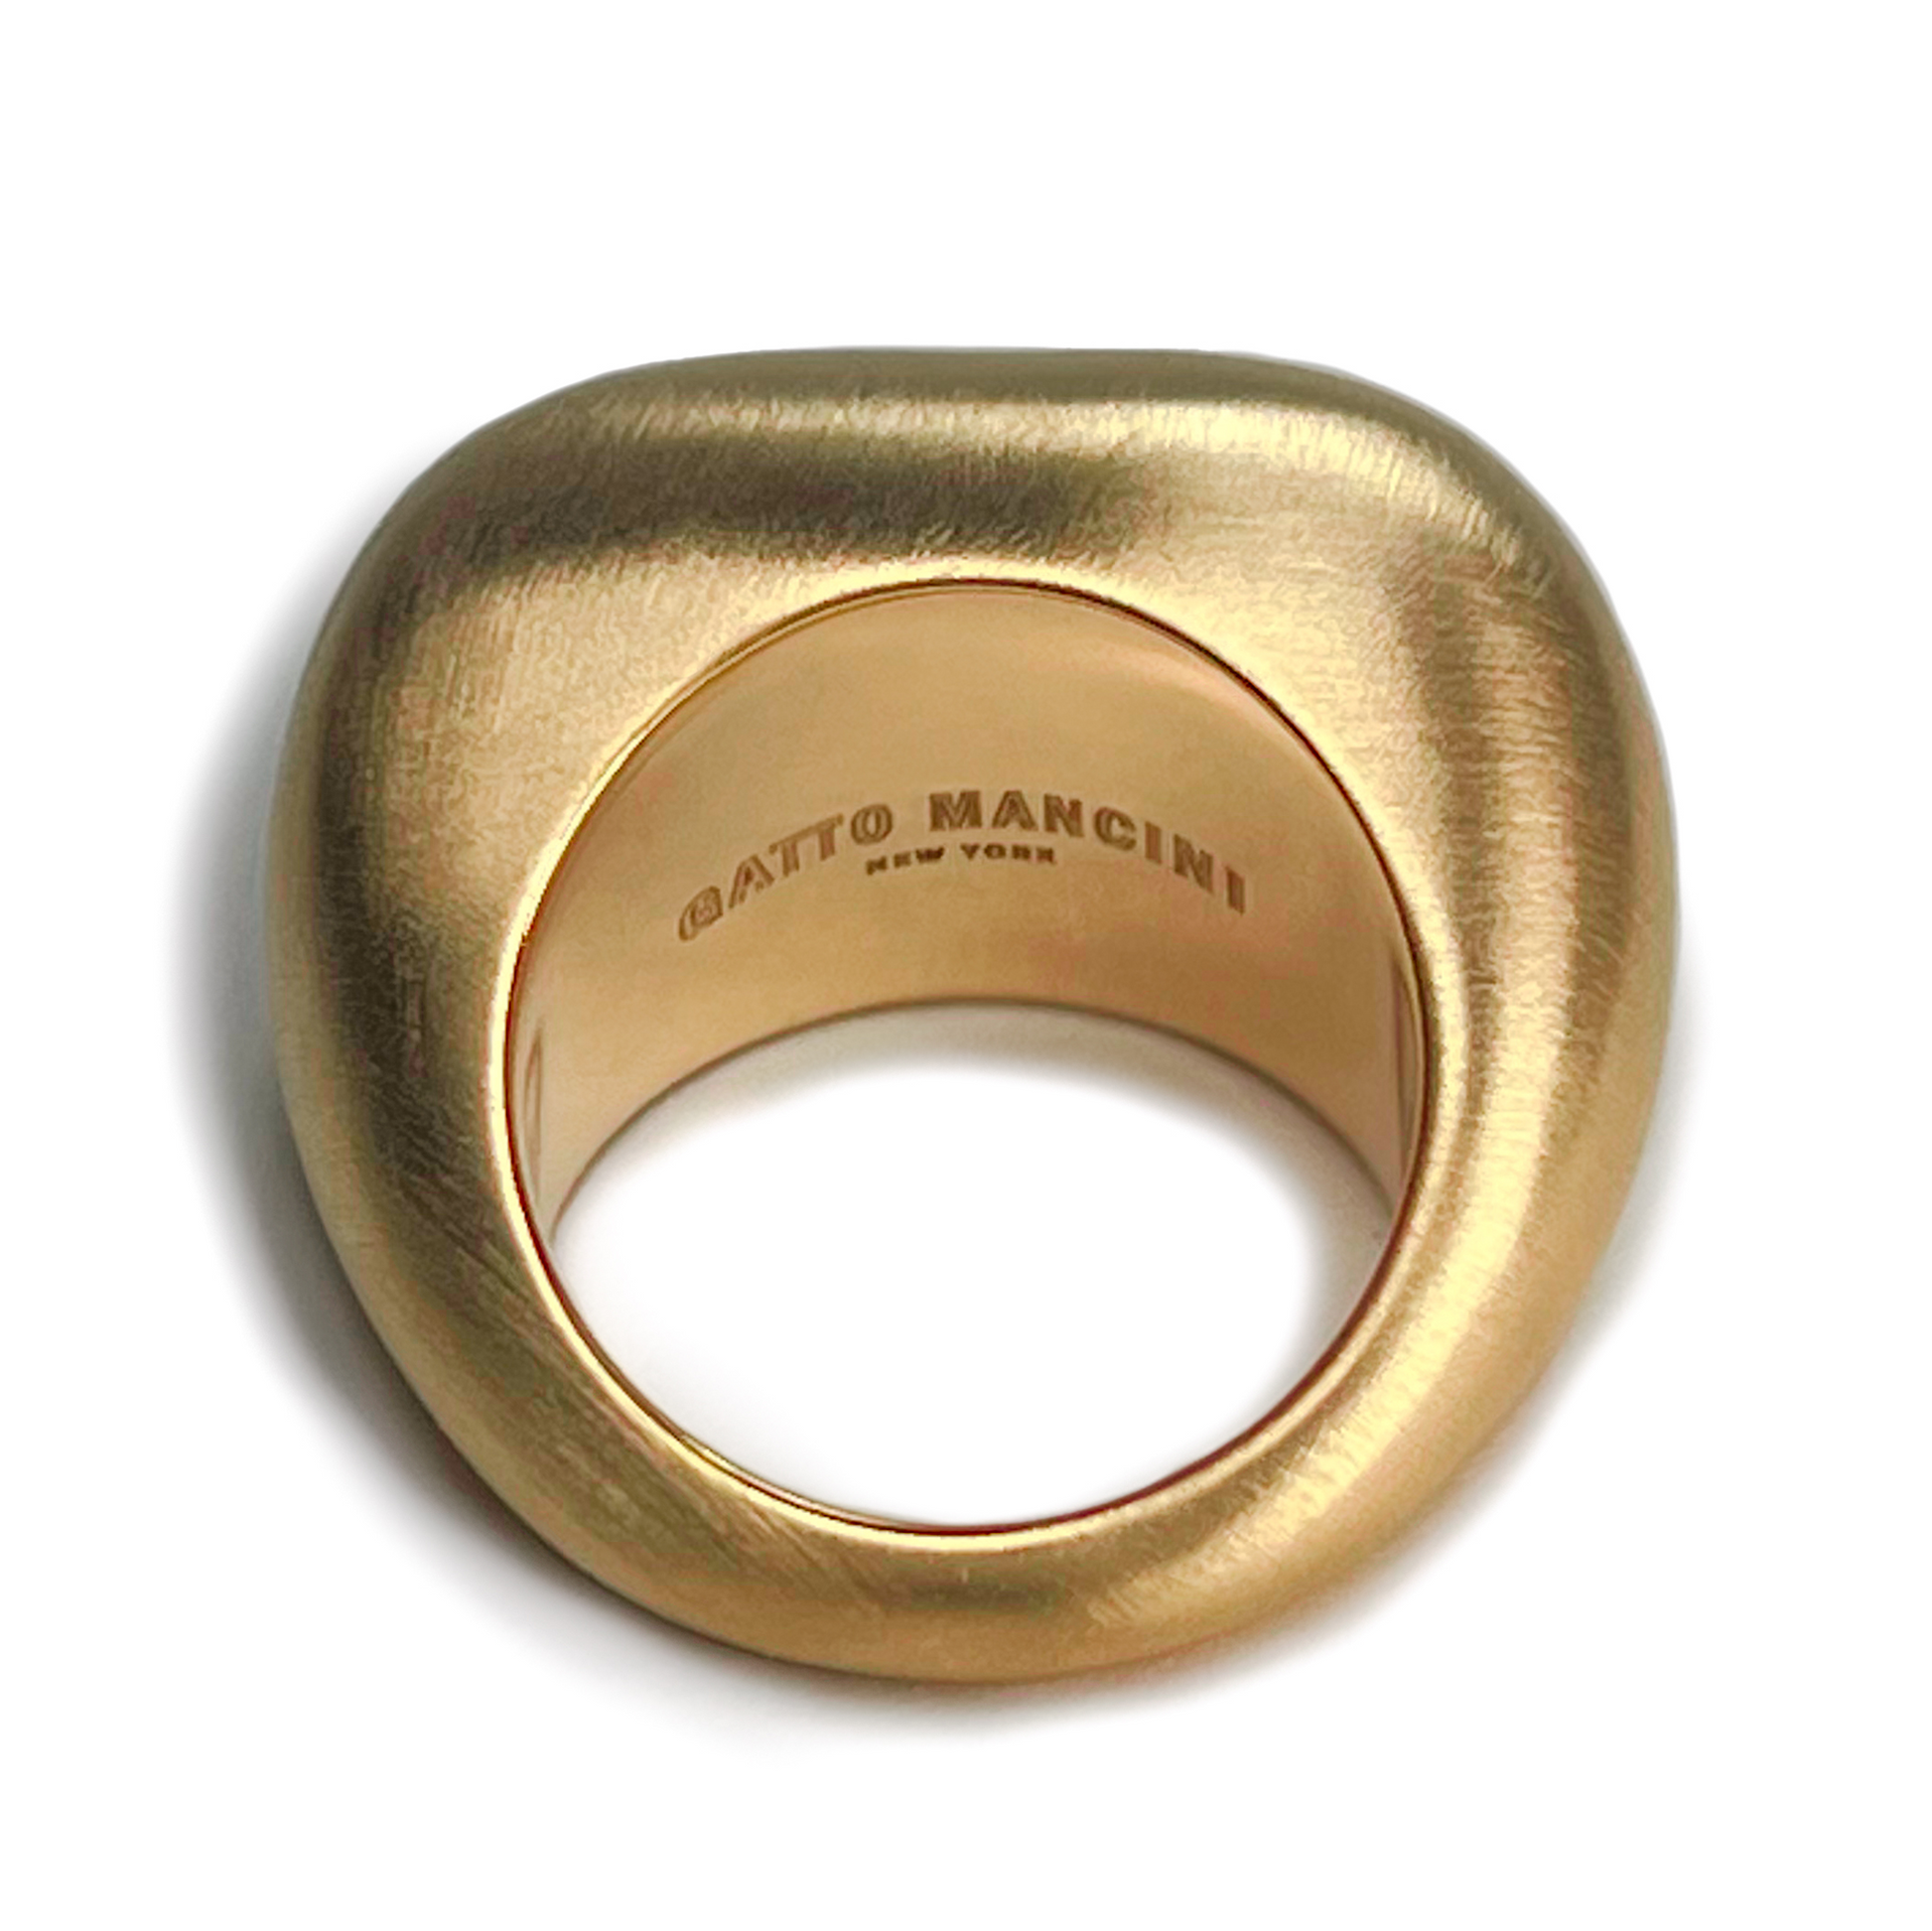 A luxurious Gatto Mancini Ring No. 1 on a white background.